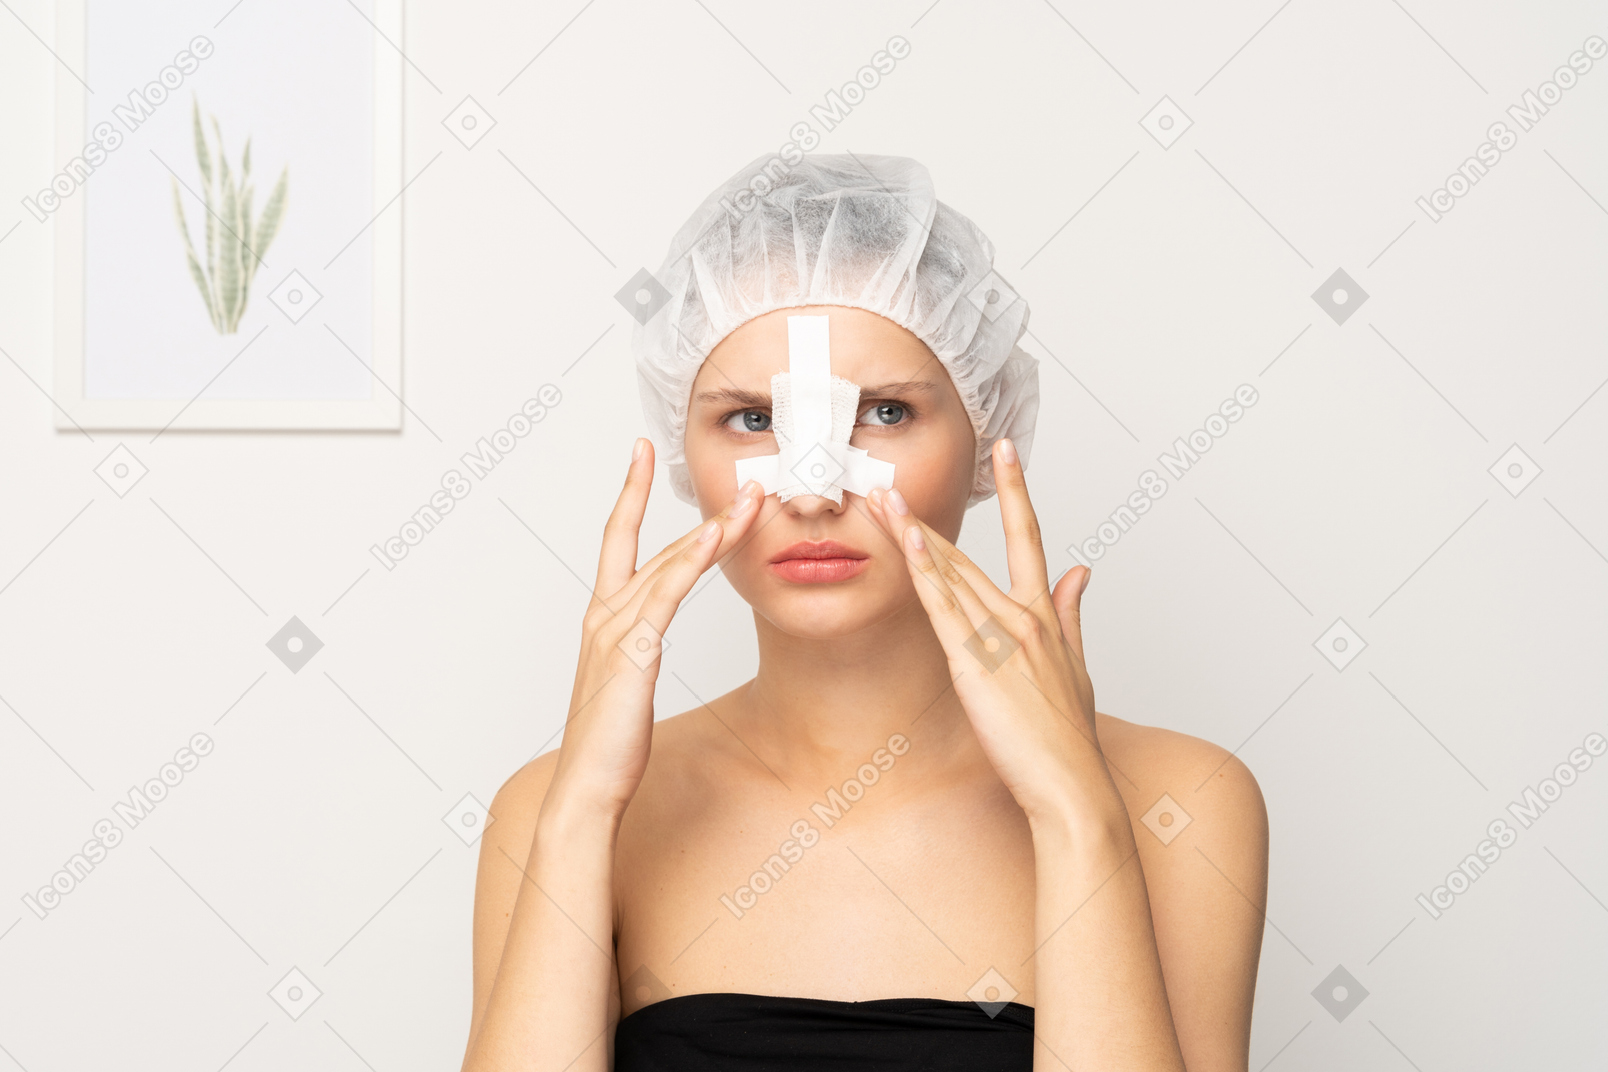 Grumpy young woman with bandaged nose touching her face